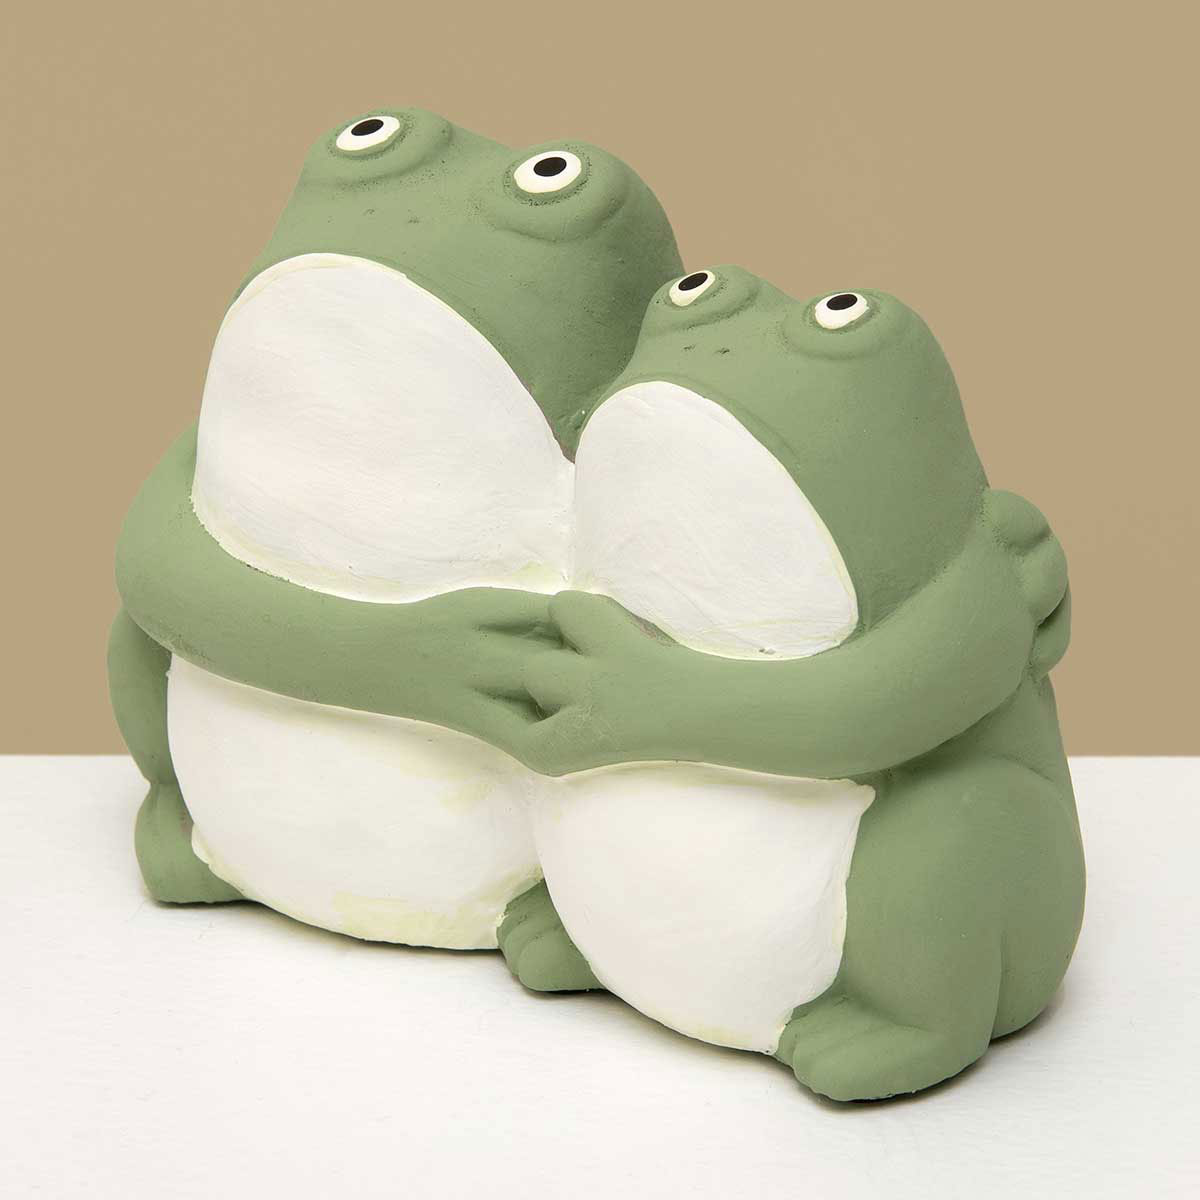 HUGGING FROGS 5.75IN X 3.25IN X 4.25IN GREEN/WHITE CONCRETE